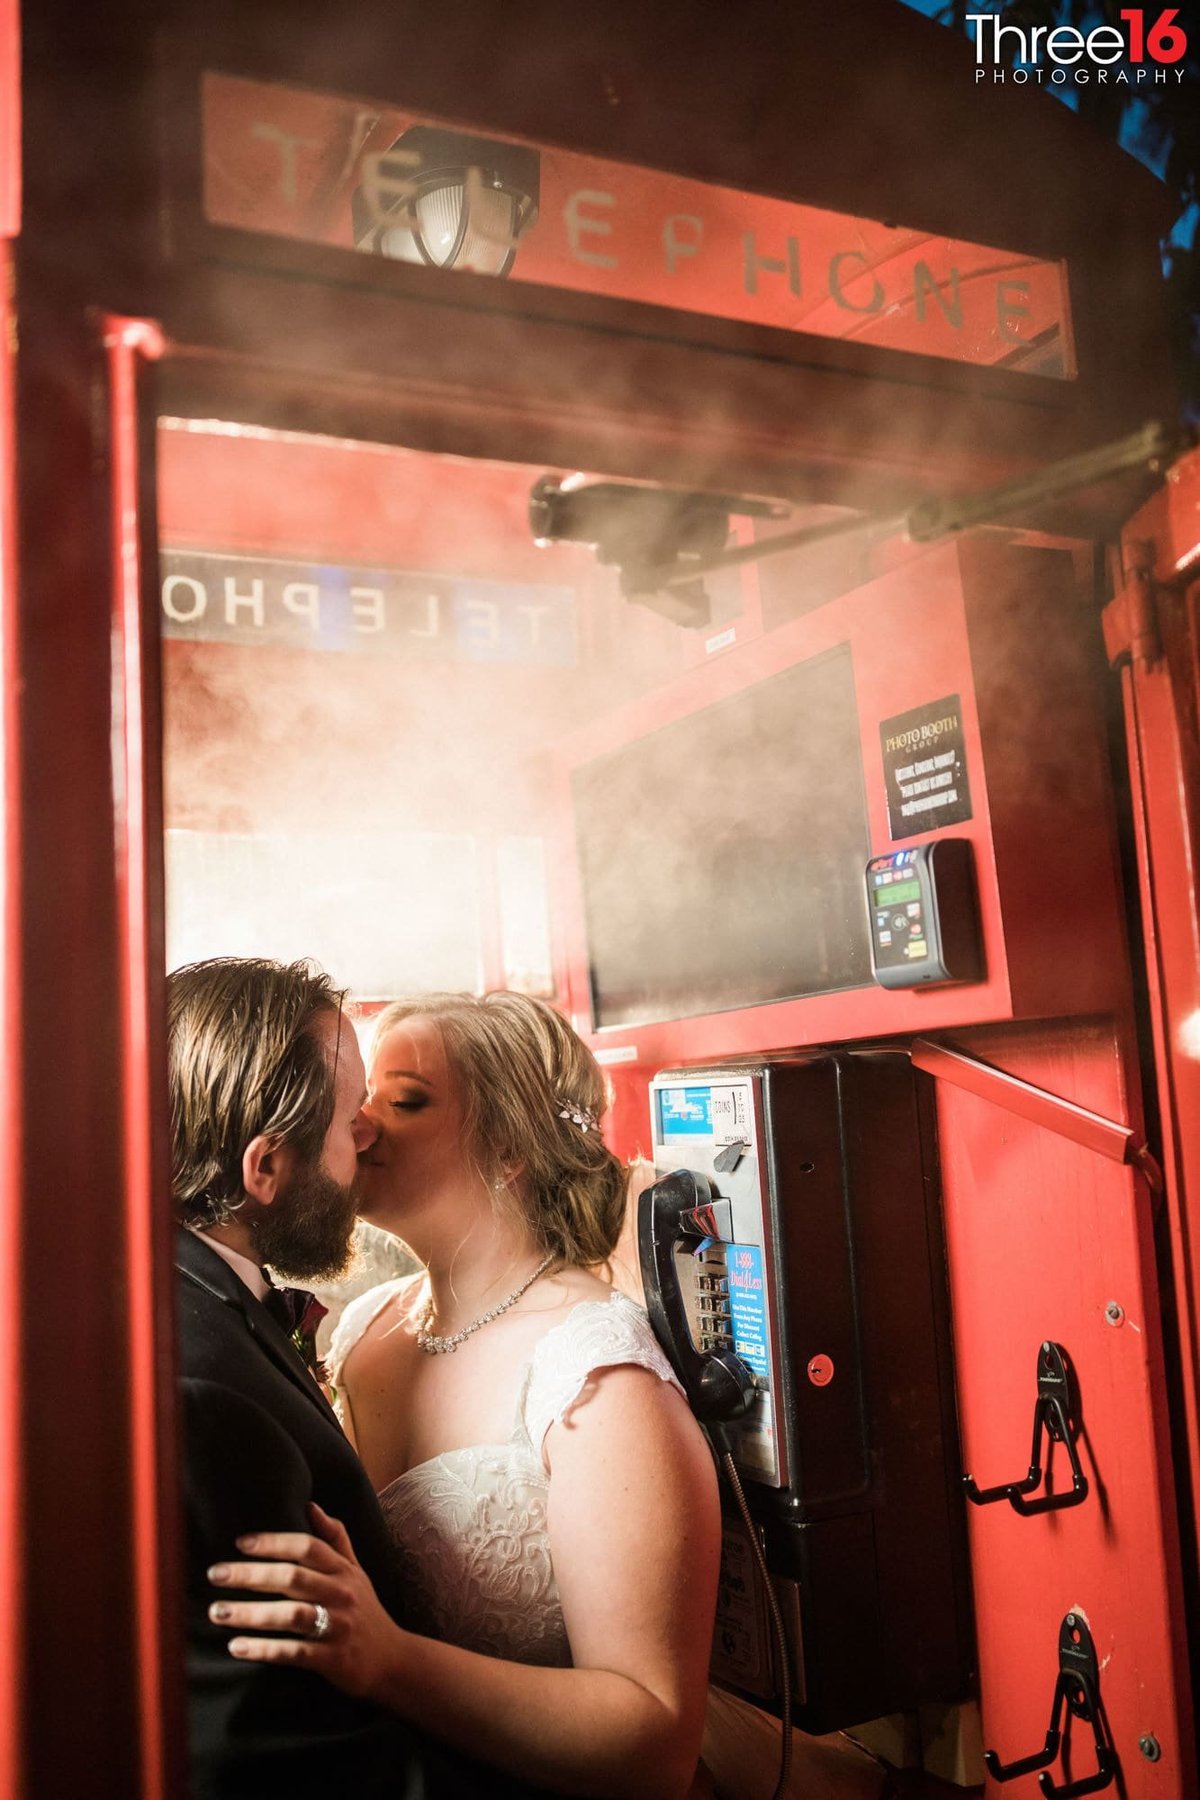 Bride and Groom share a steamy kiss in an old telephone booth